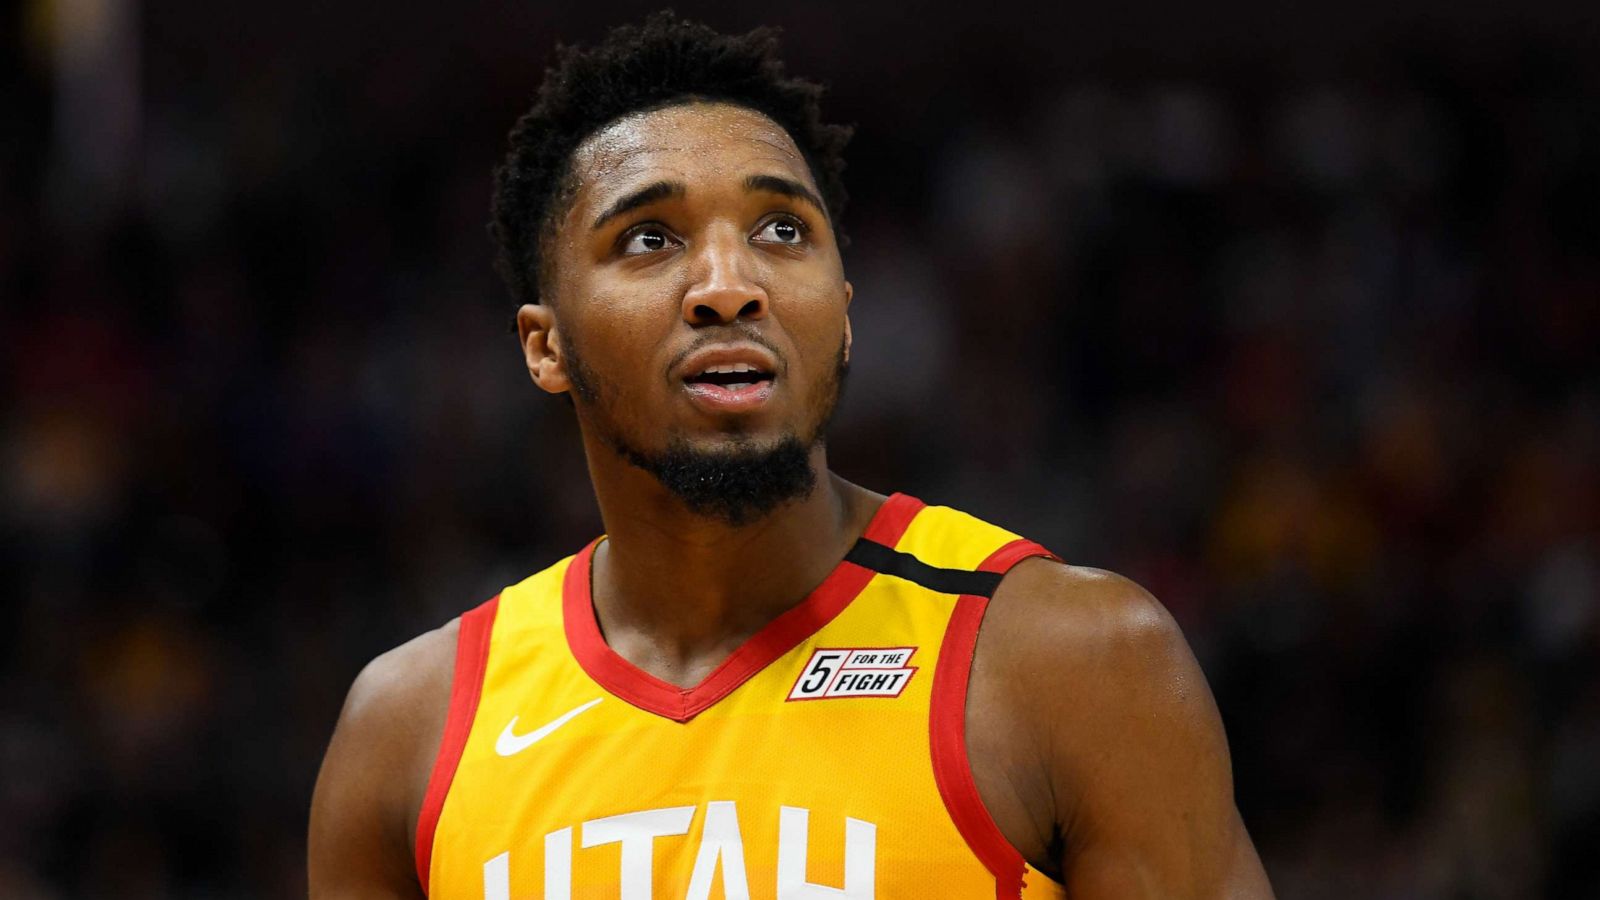 Donovan Mitchell seems to complain about all-NBA team